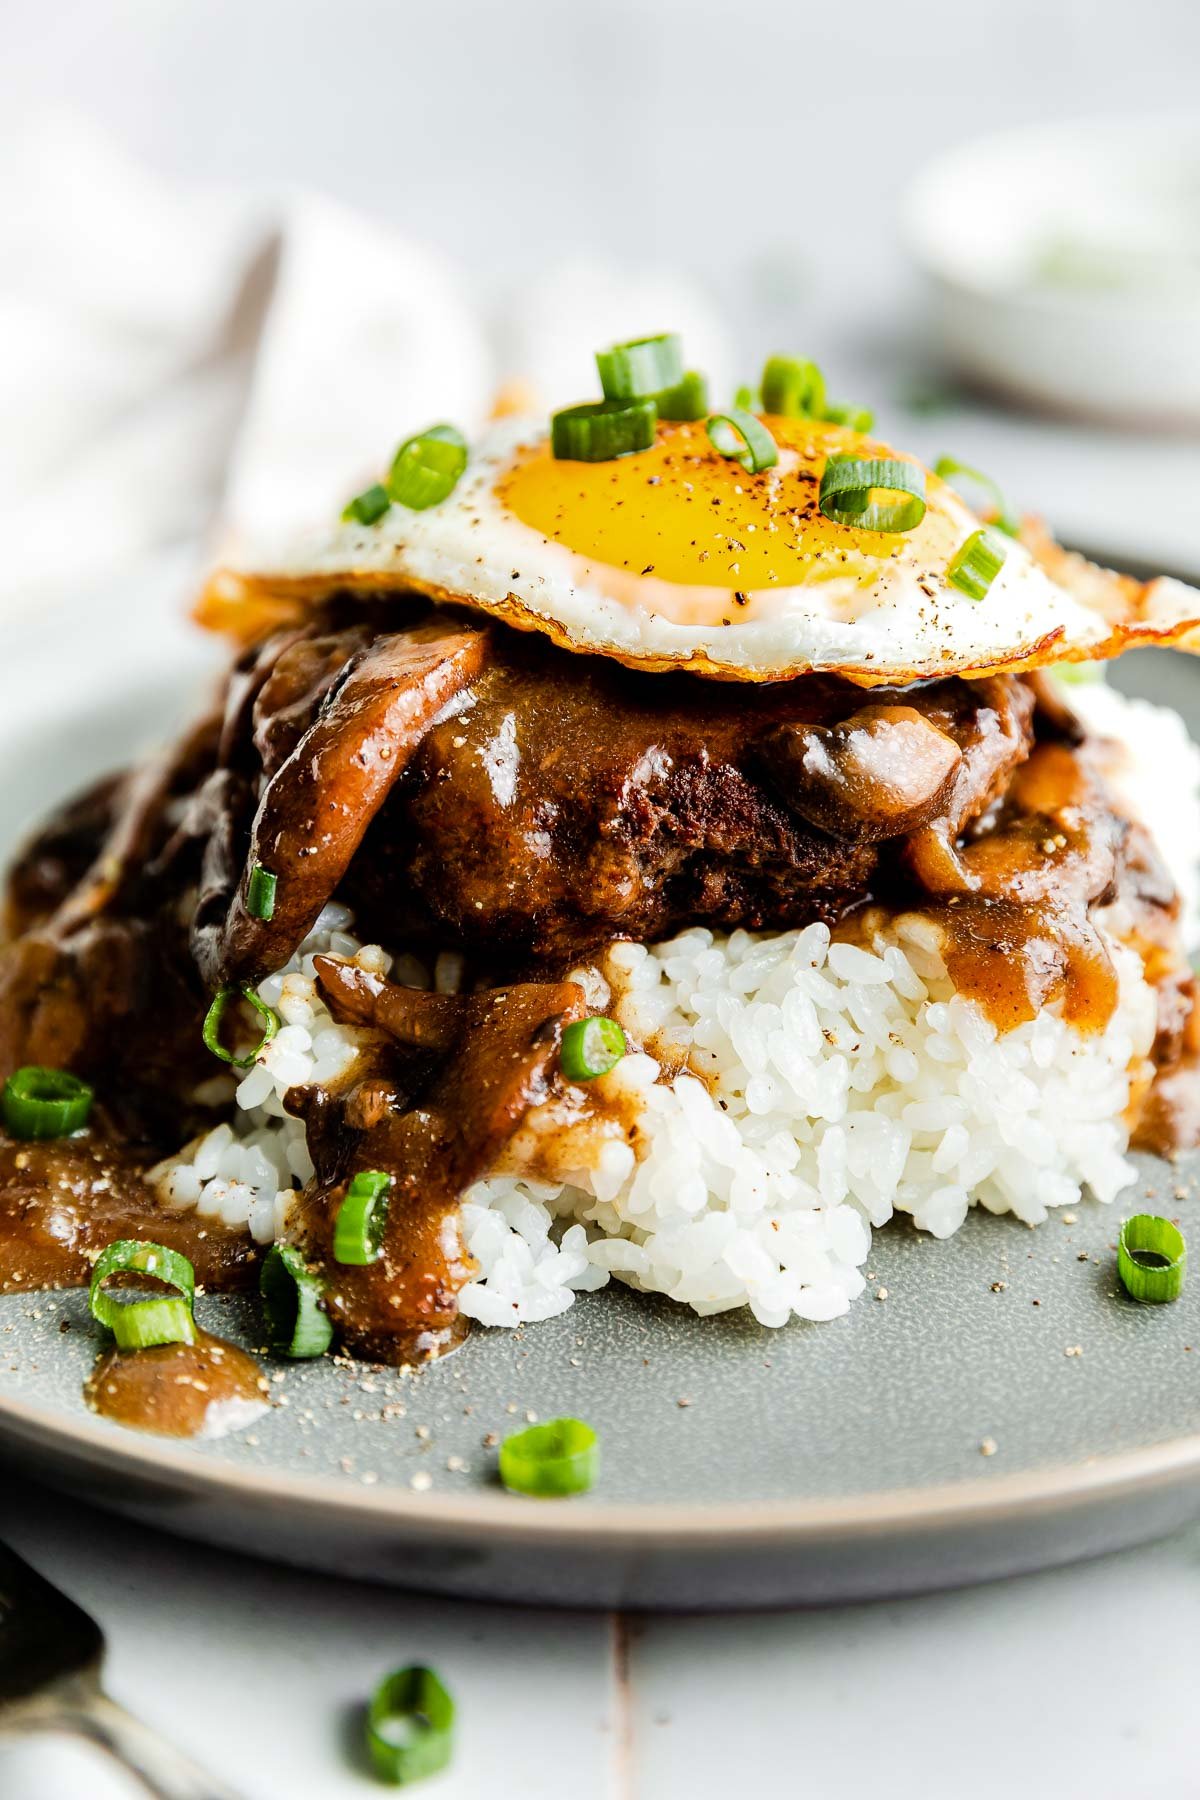 https://playswellwithbutter.com/wp-content/uploads/2023/05/Loco-Moco-13.jpg